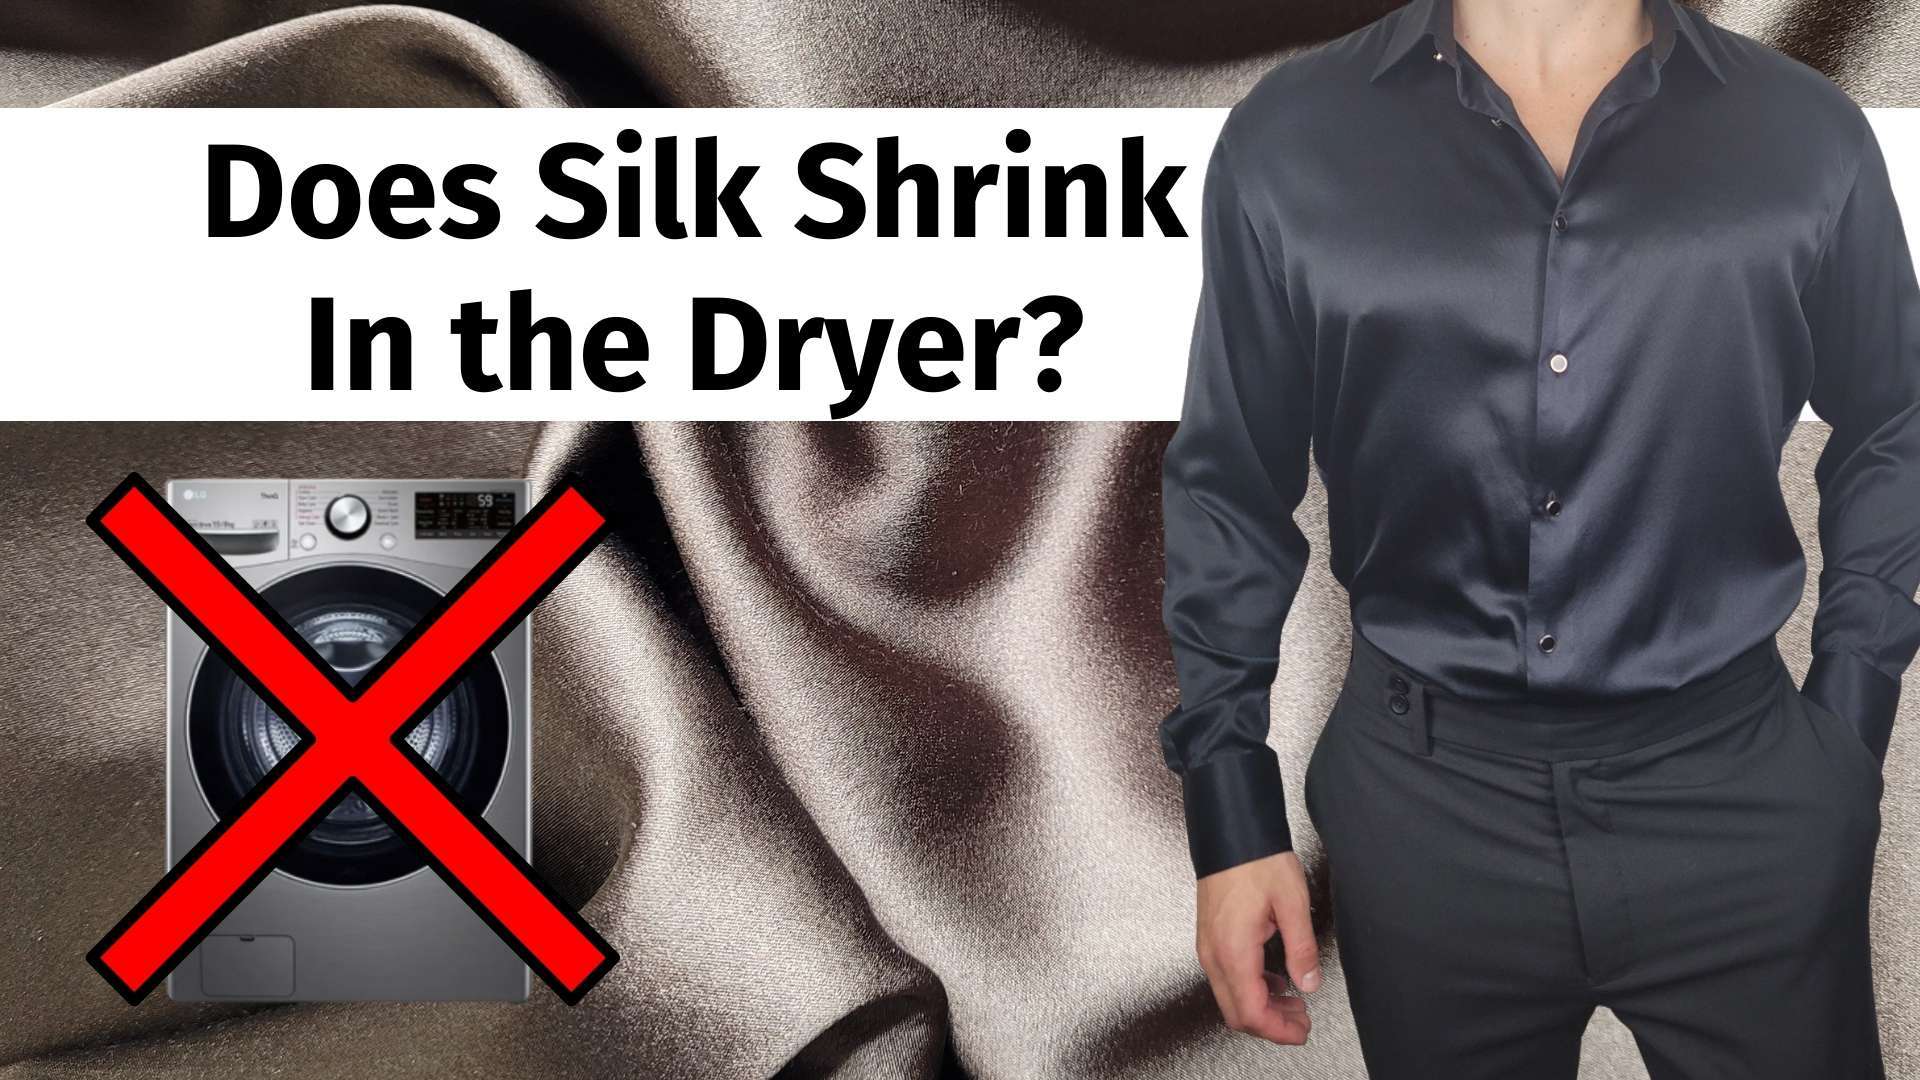 does silk shrink in the dryer banner image with a photo of a dryer with an x on it